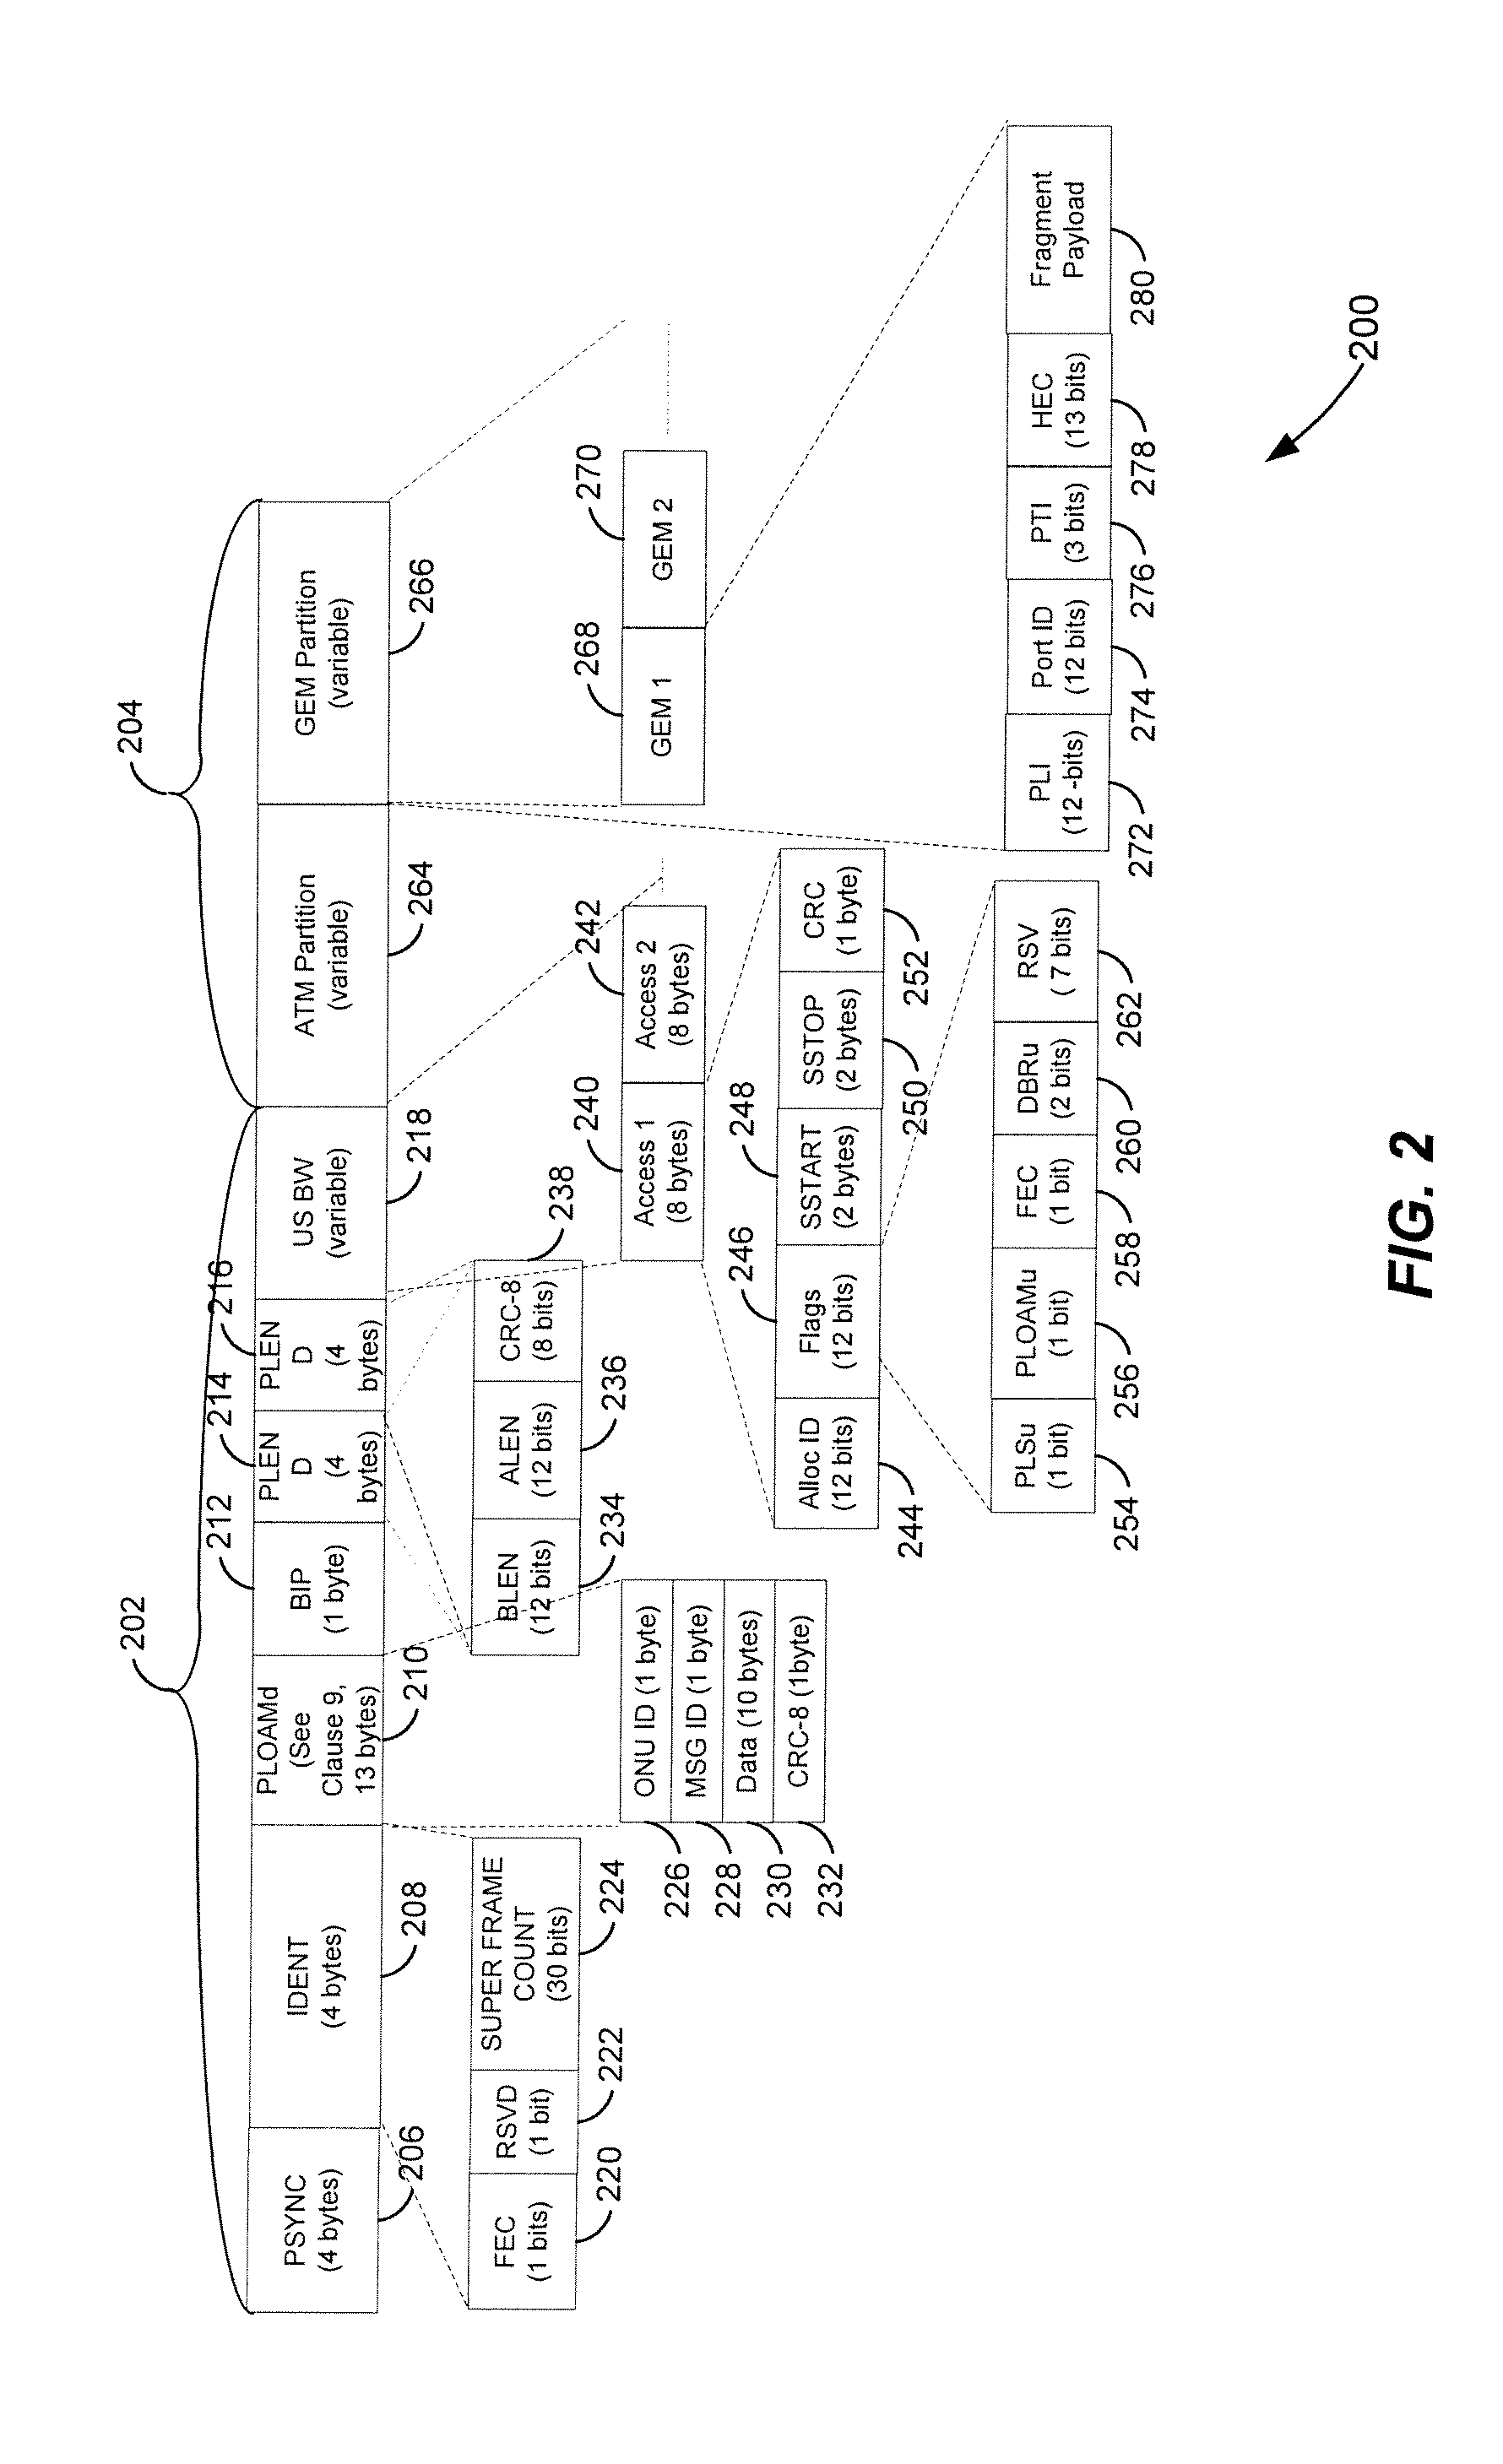 Processing architecture for passive optical network